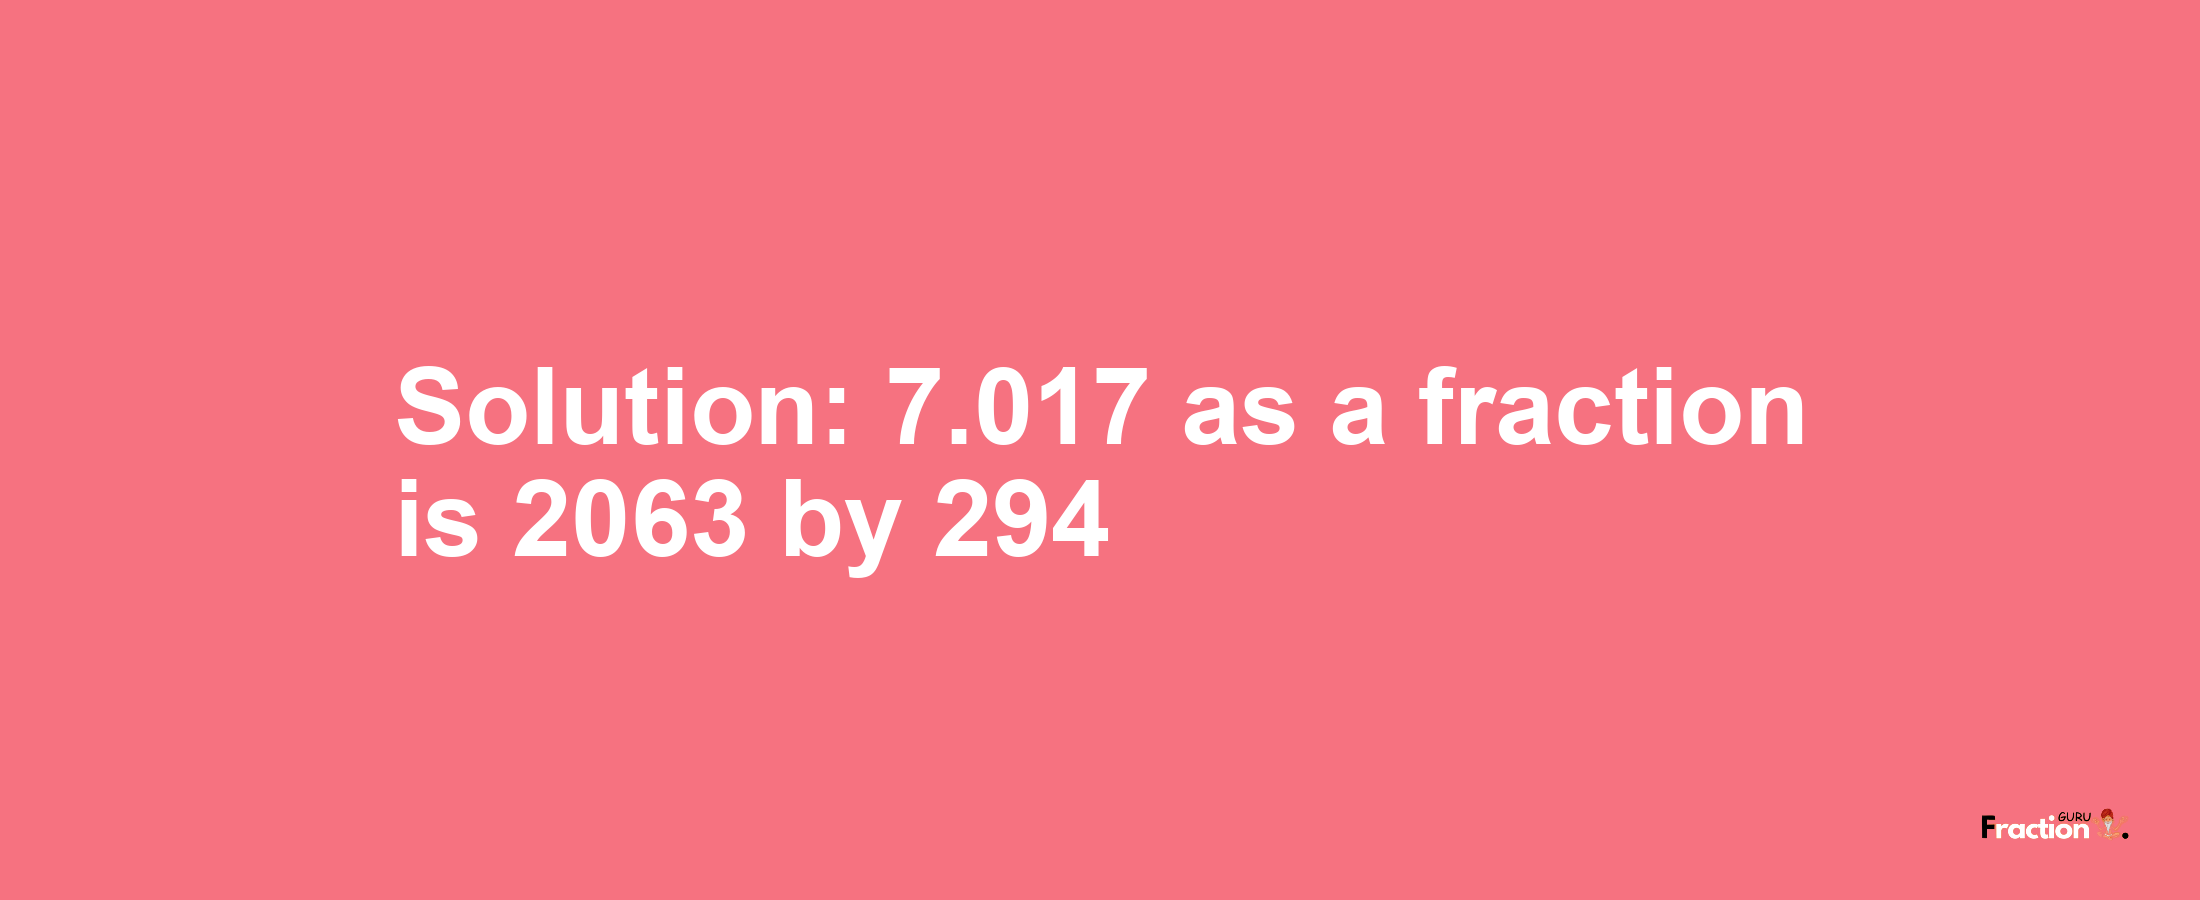 Solution:7.017 as a fraction is 2063/294